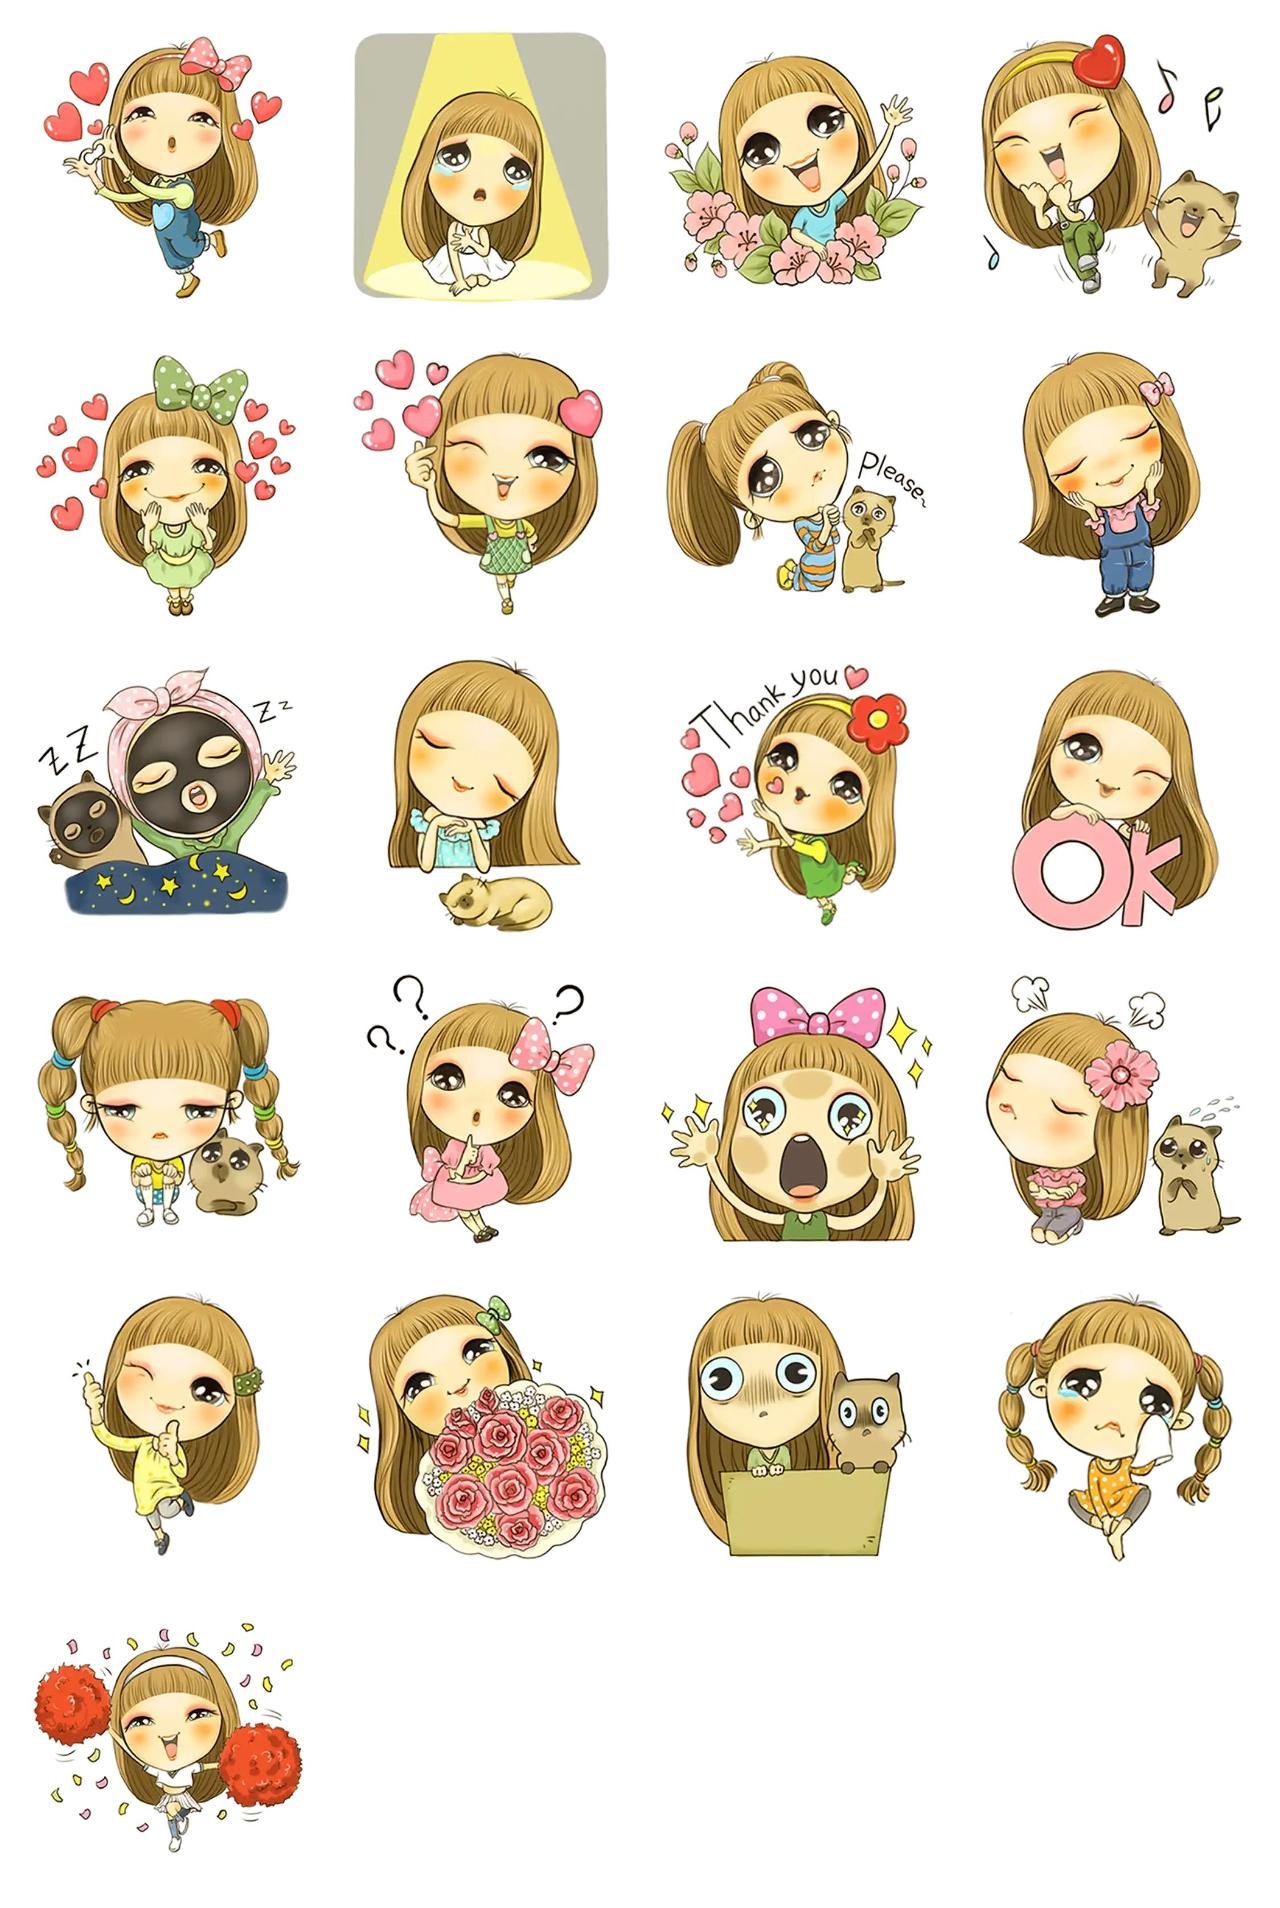 The Lively Girl People sticker pack for Whatsapp, Telegram, Signal, and others chatting and message apps